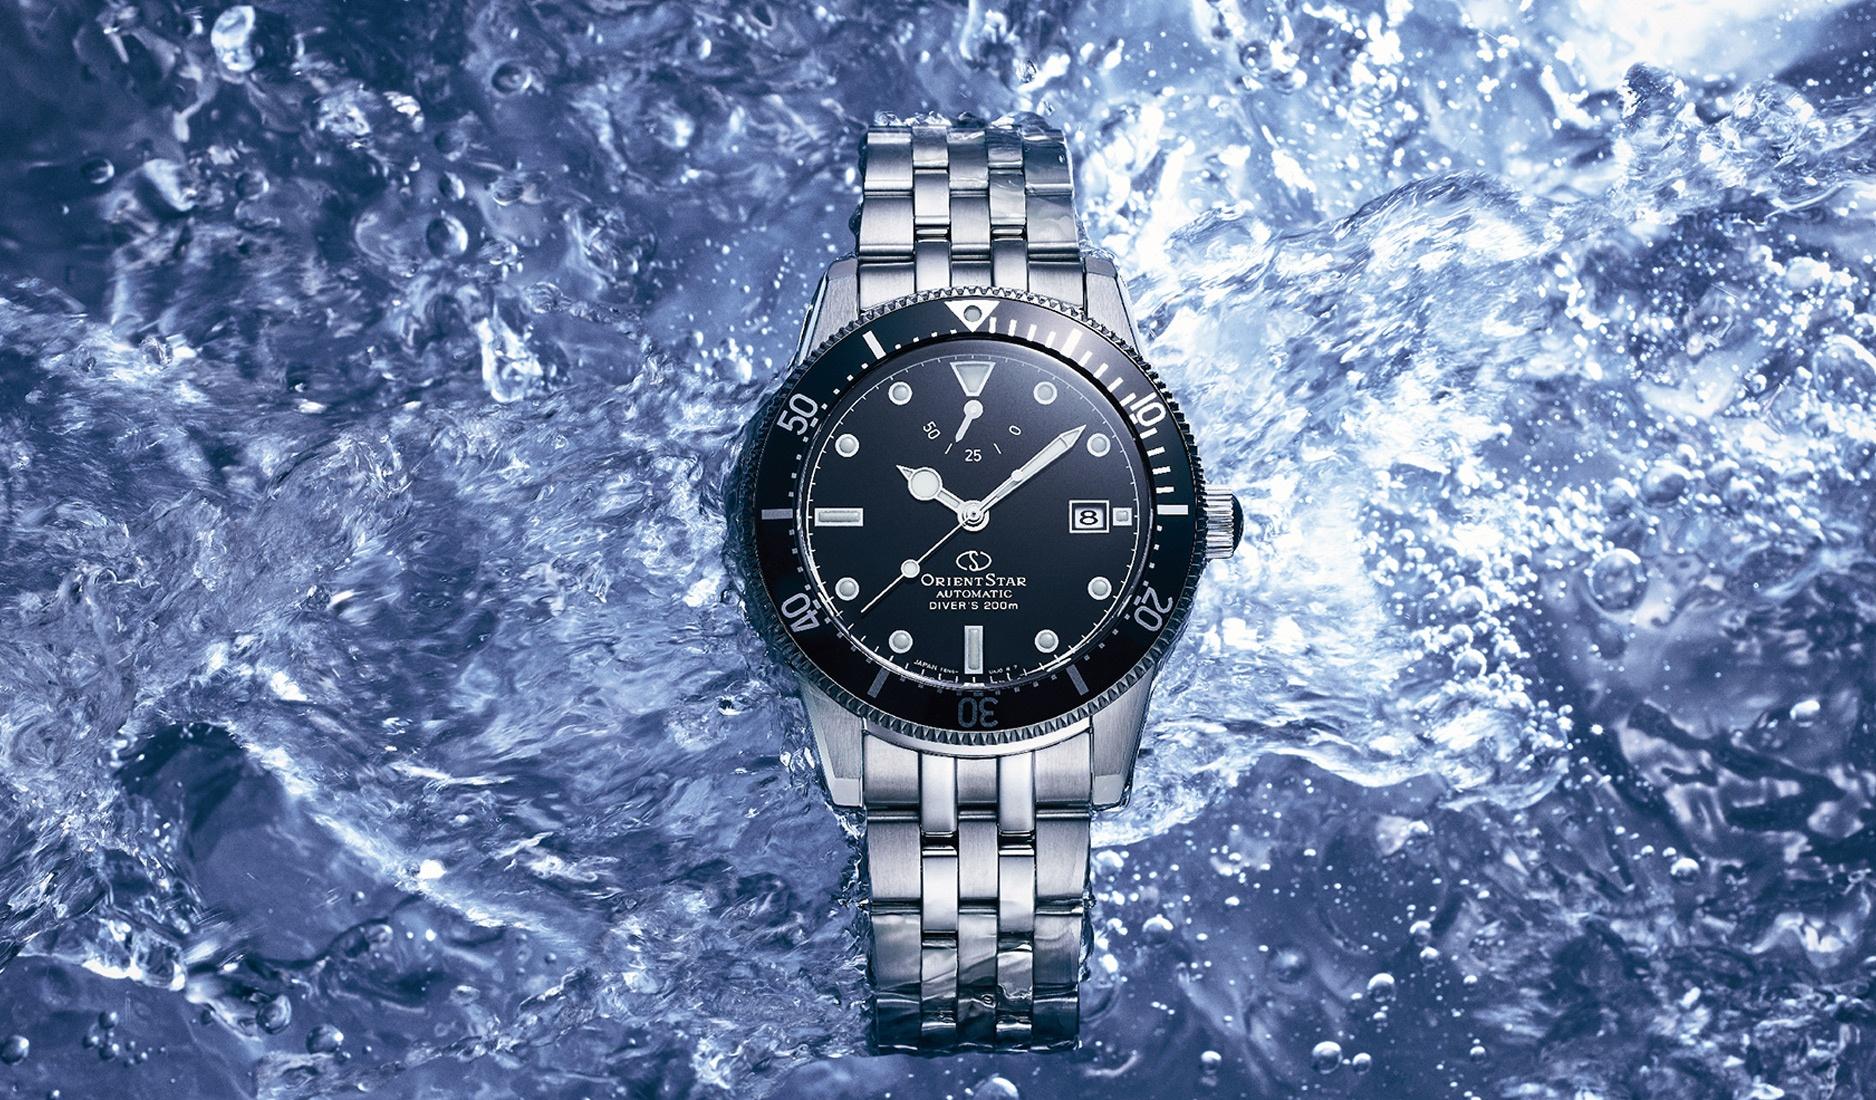 INTRODUCING: Orient Star Diver 1964 2nd Edition